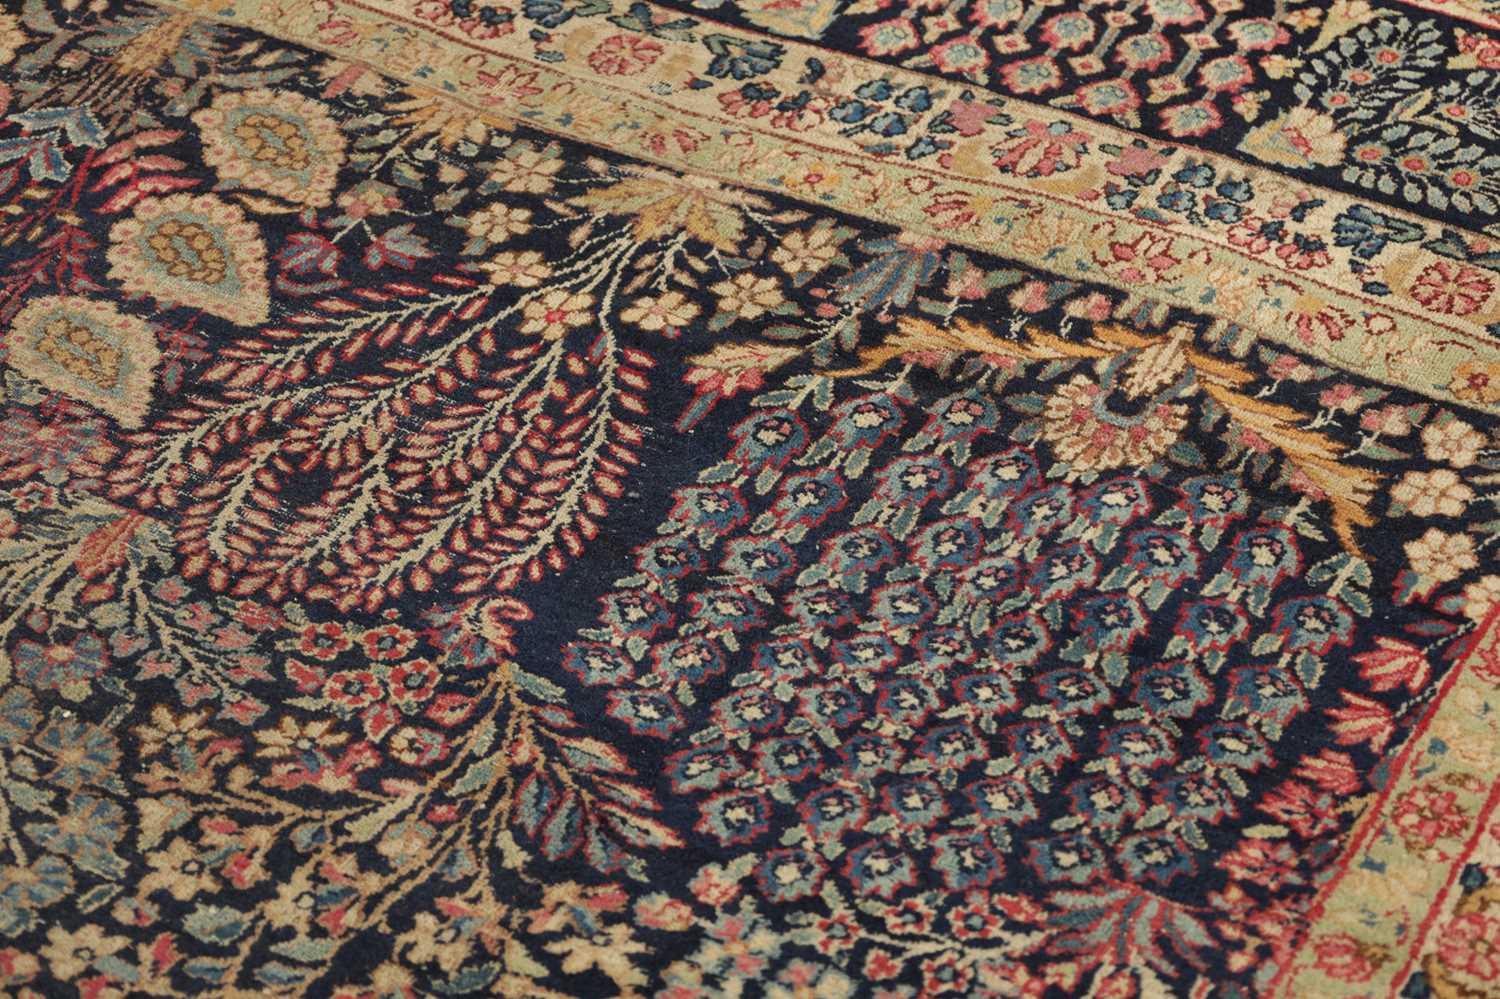 A LARGE ANTIQUE TABRIZ PERSIAN RUG - Image 6 of 9